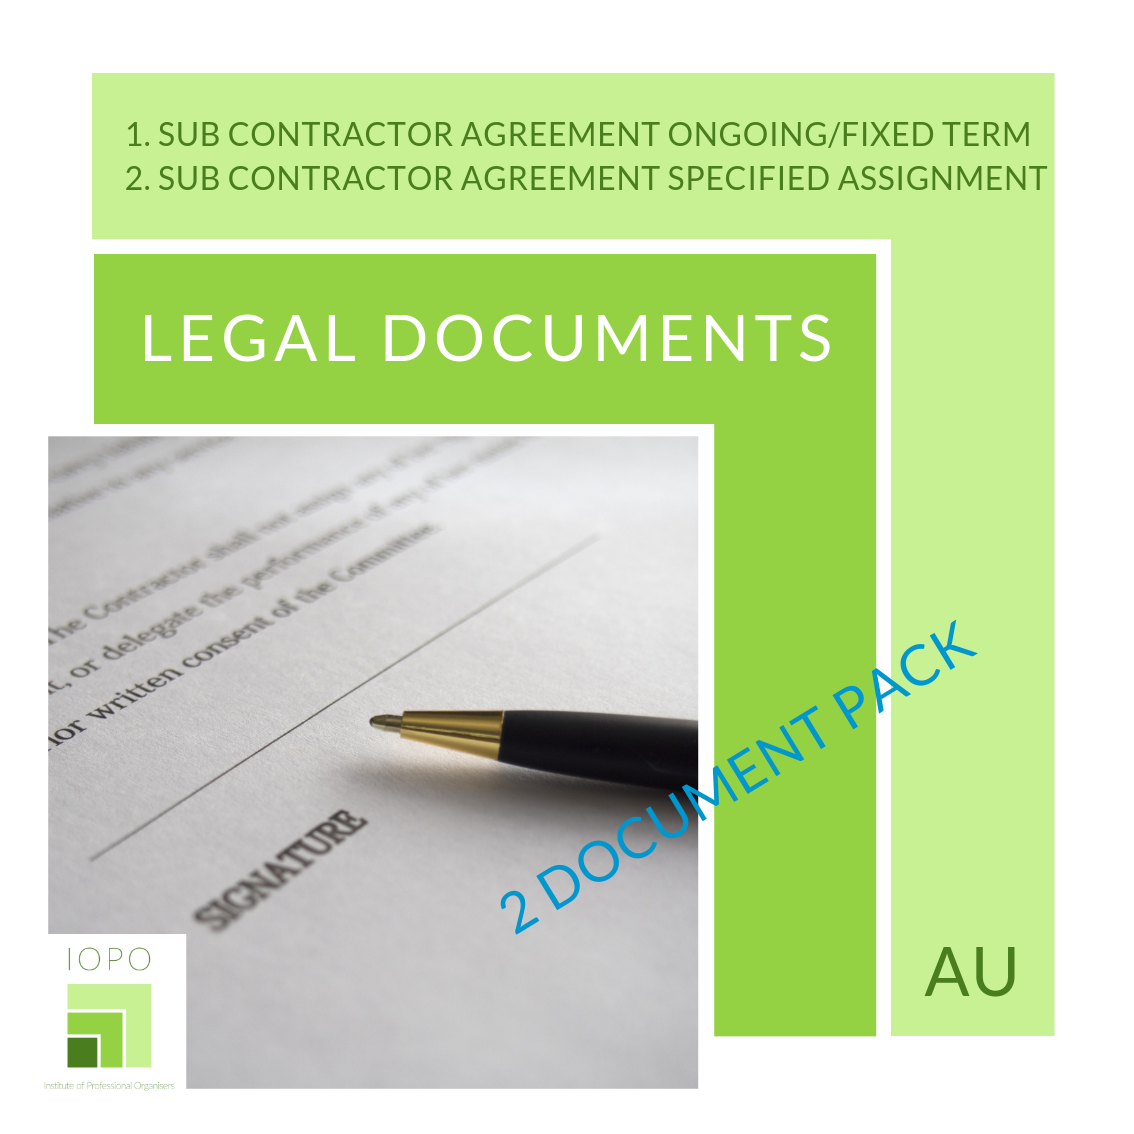 Sub Contractor Agreement Pack